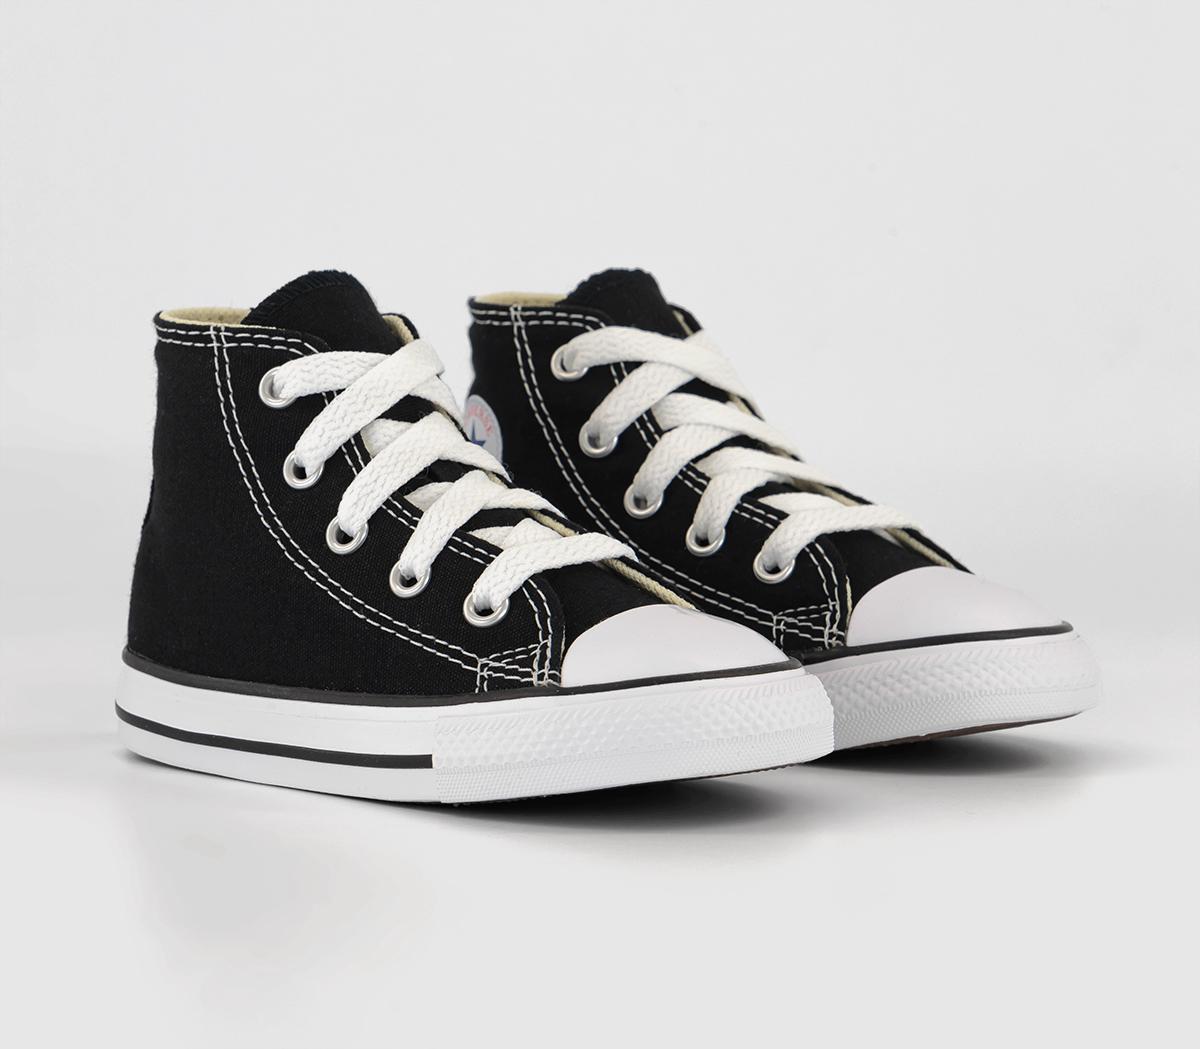 Converse Kids Star High Top Black Canvas Trainers, 3 Infant-10 Youth, 5 Infant